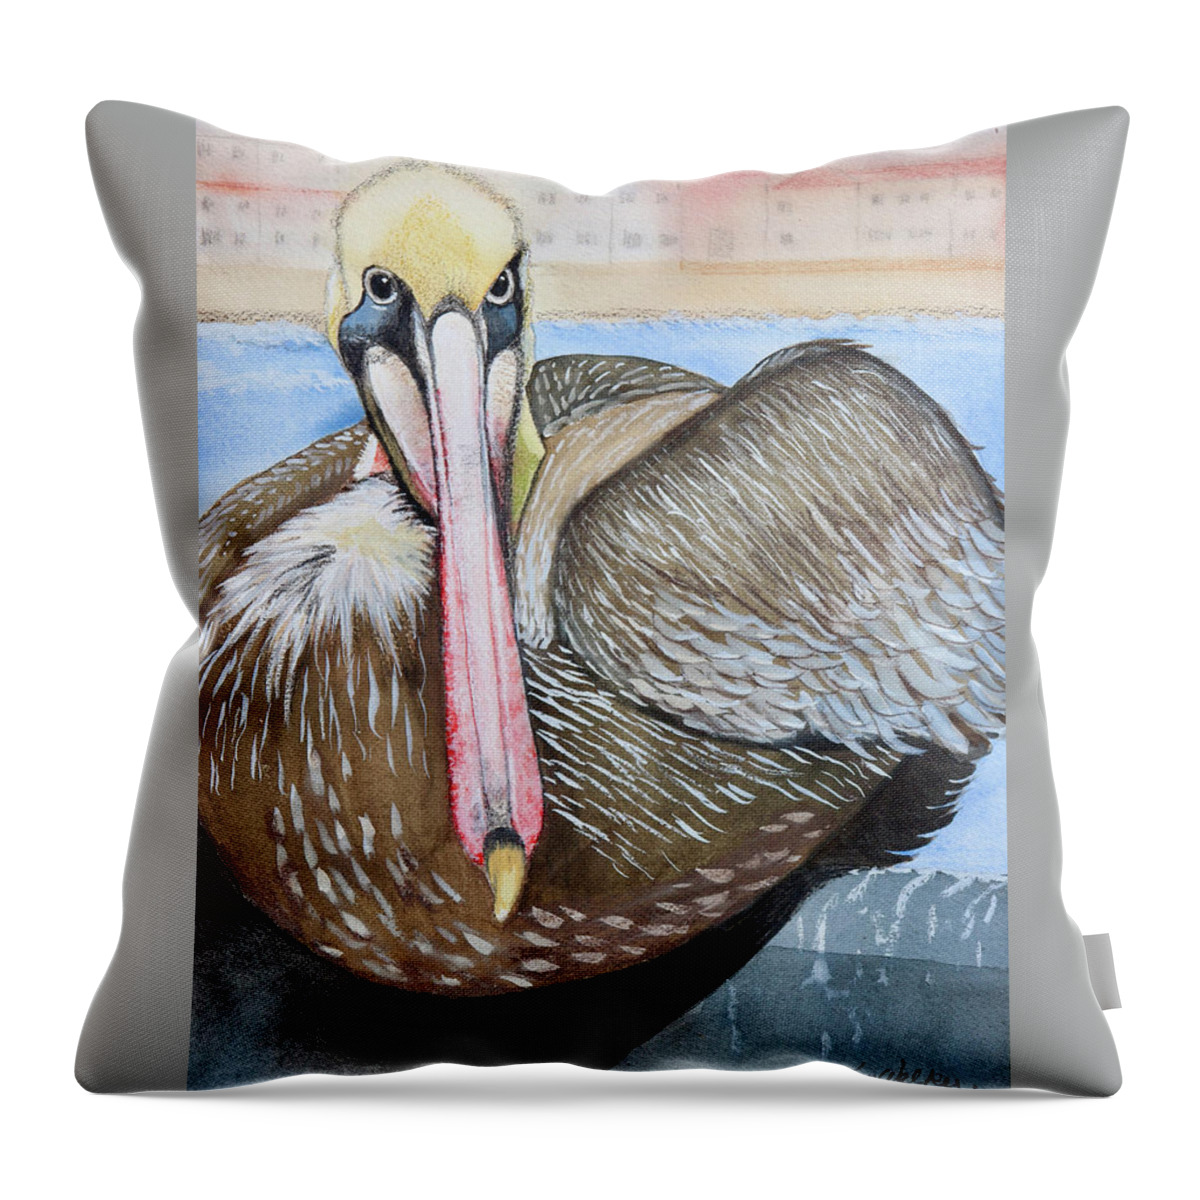 Orange Throw Pillow featuring the painting In Repose Watercolor by Kimberly Walker